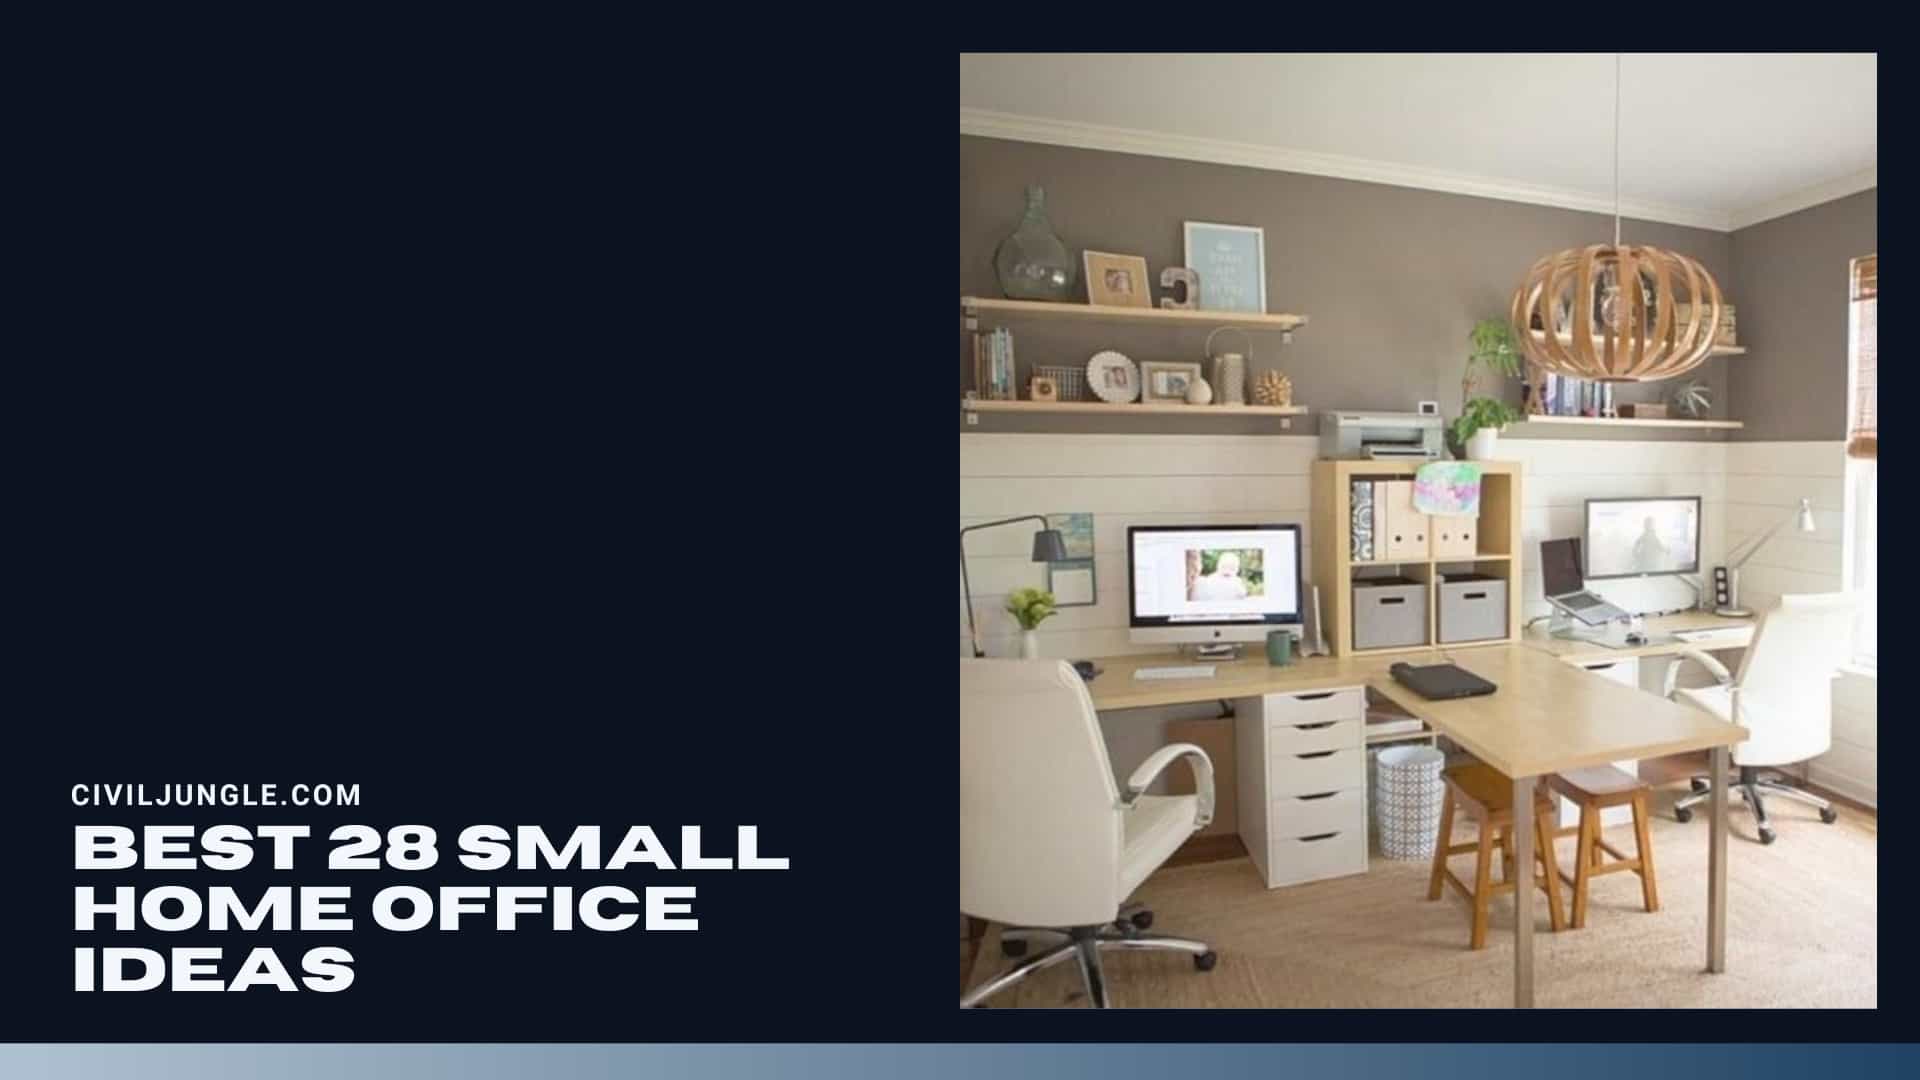 Best 28 Small Home Office Ideas